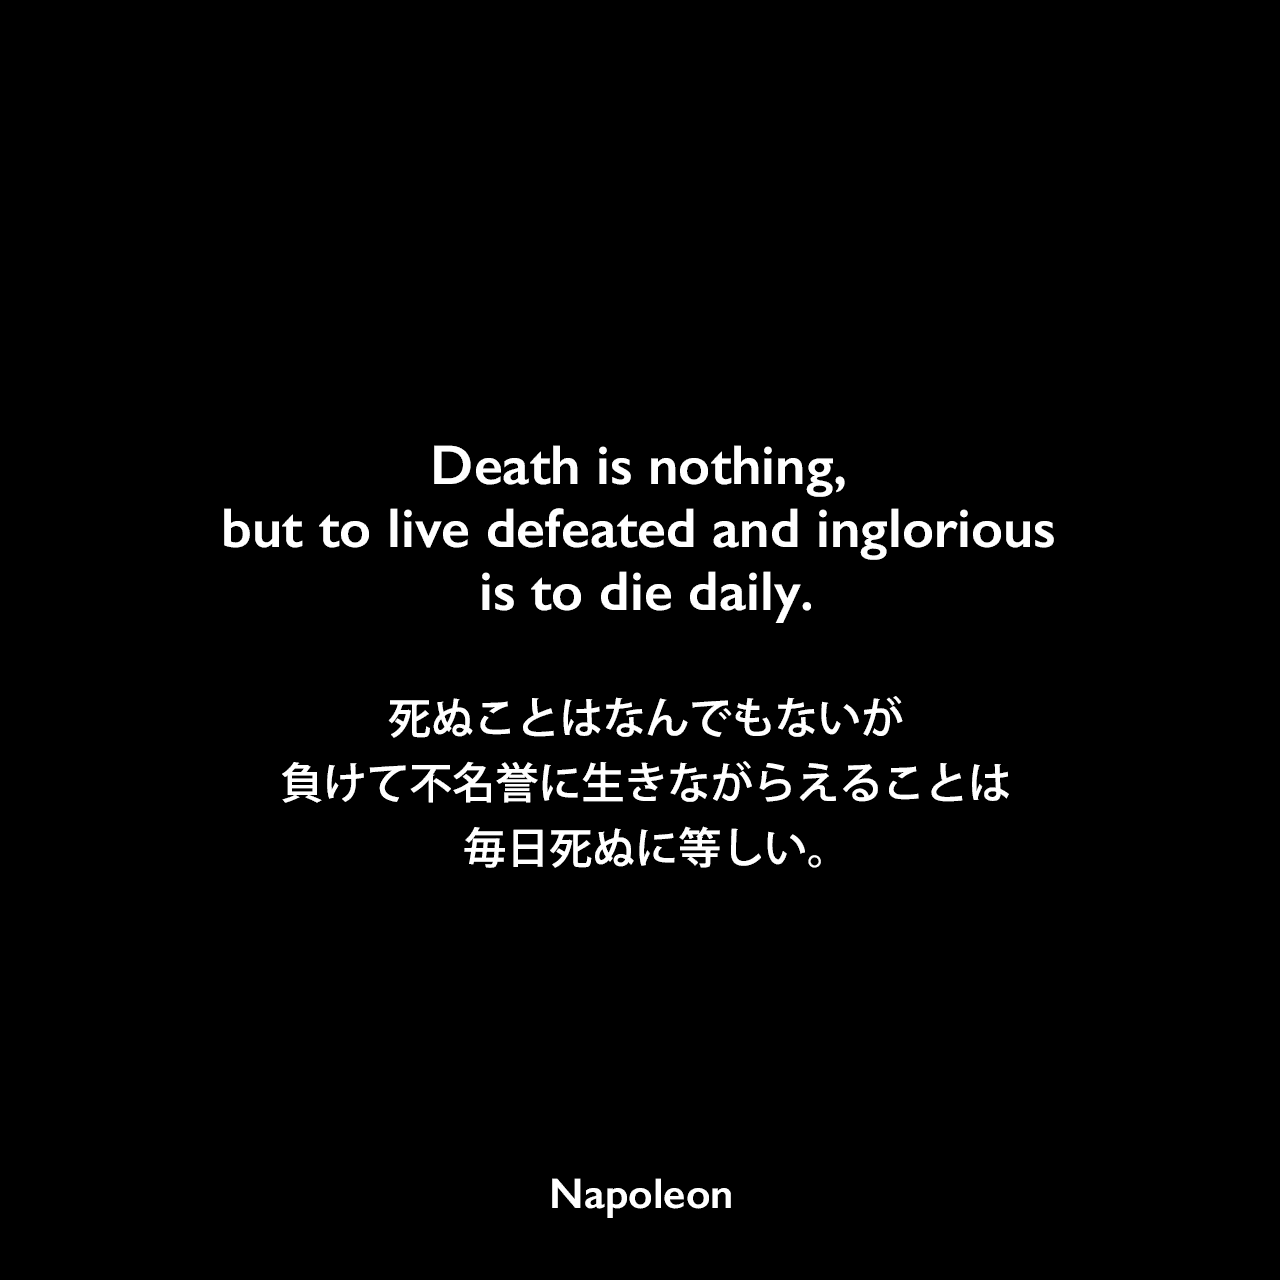 Death is nothing, but to live defeated and inglorious is to die daily.死ぬことはなんでもないが、負けて不名誉に生きながらえることは毎日死ぬに等しい。Napoleon